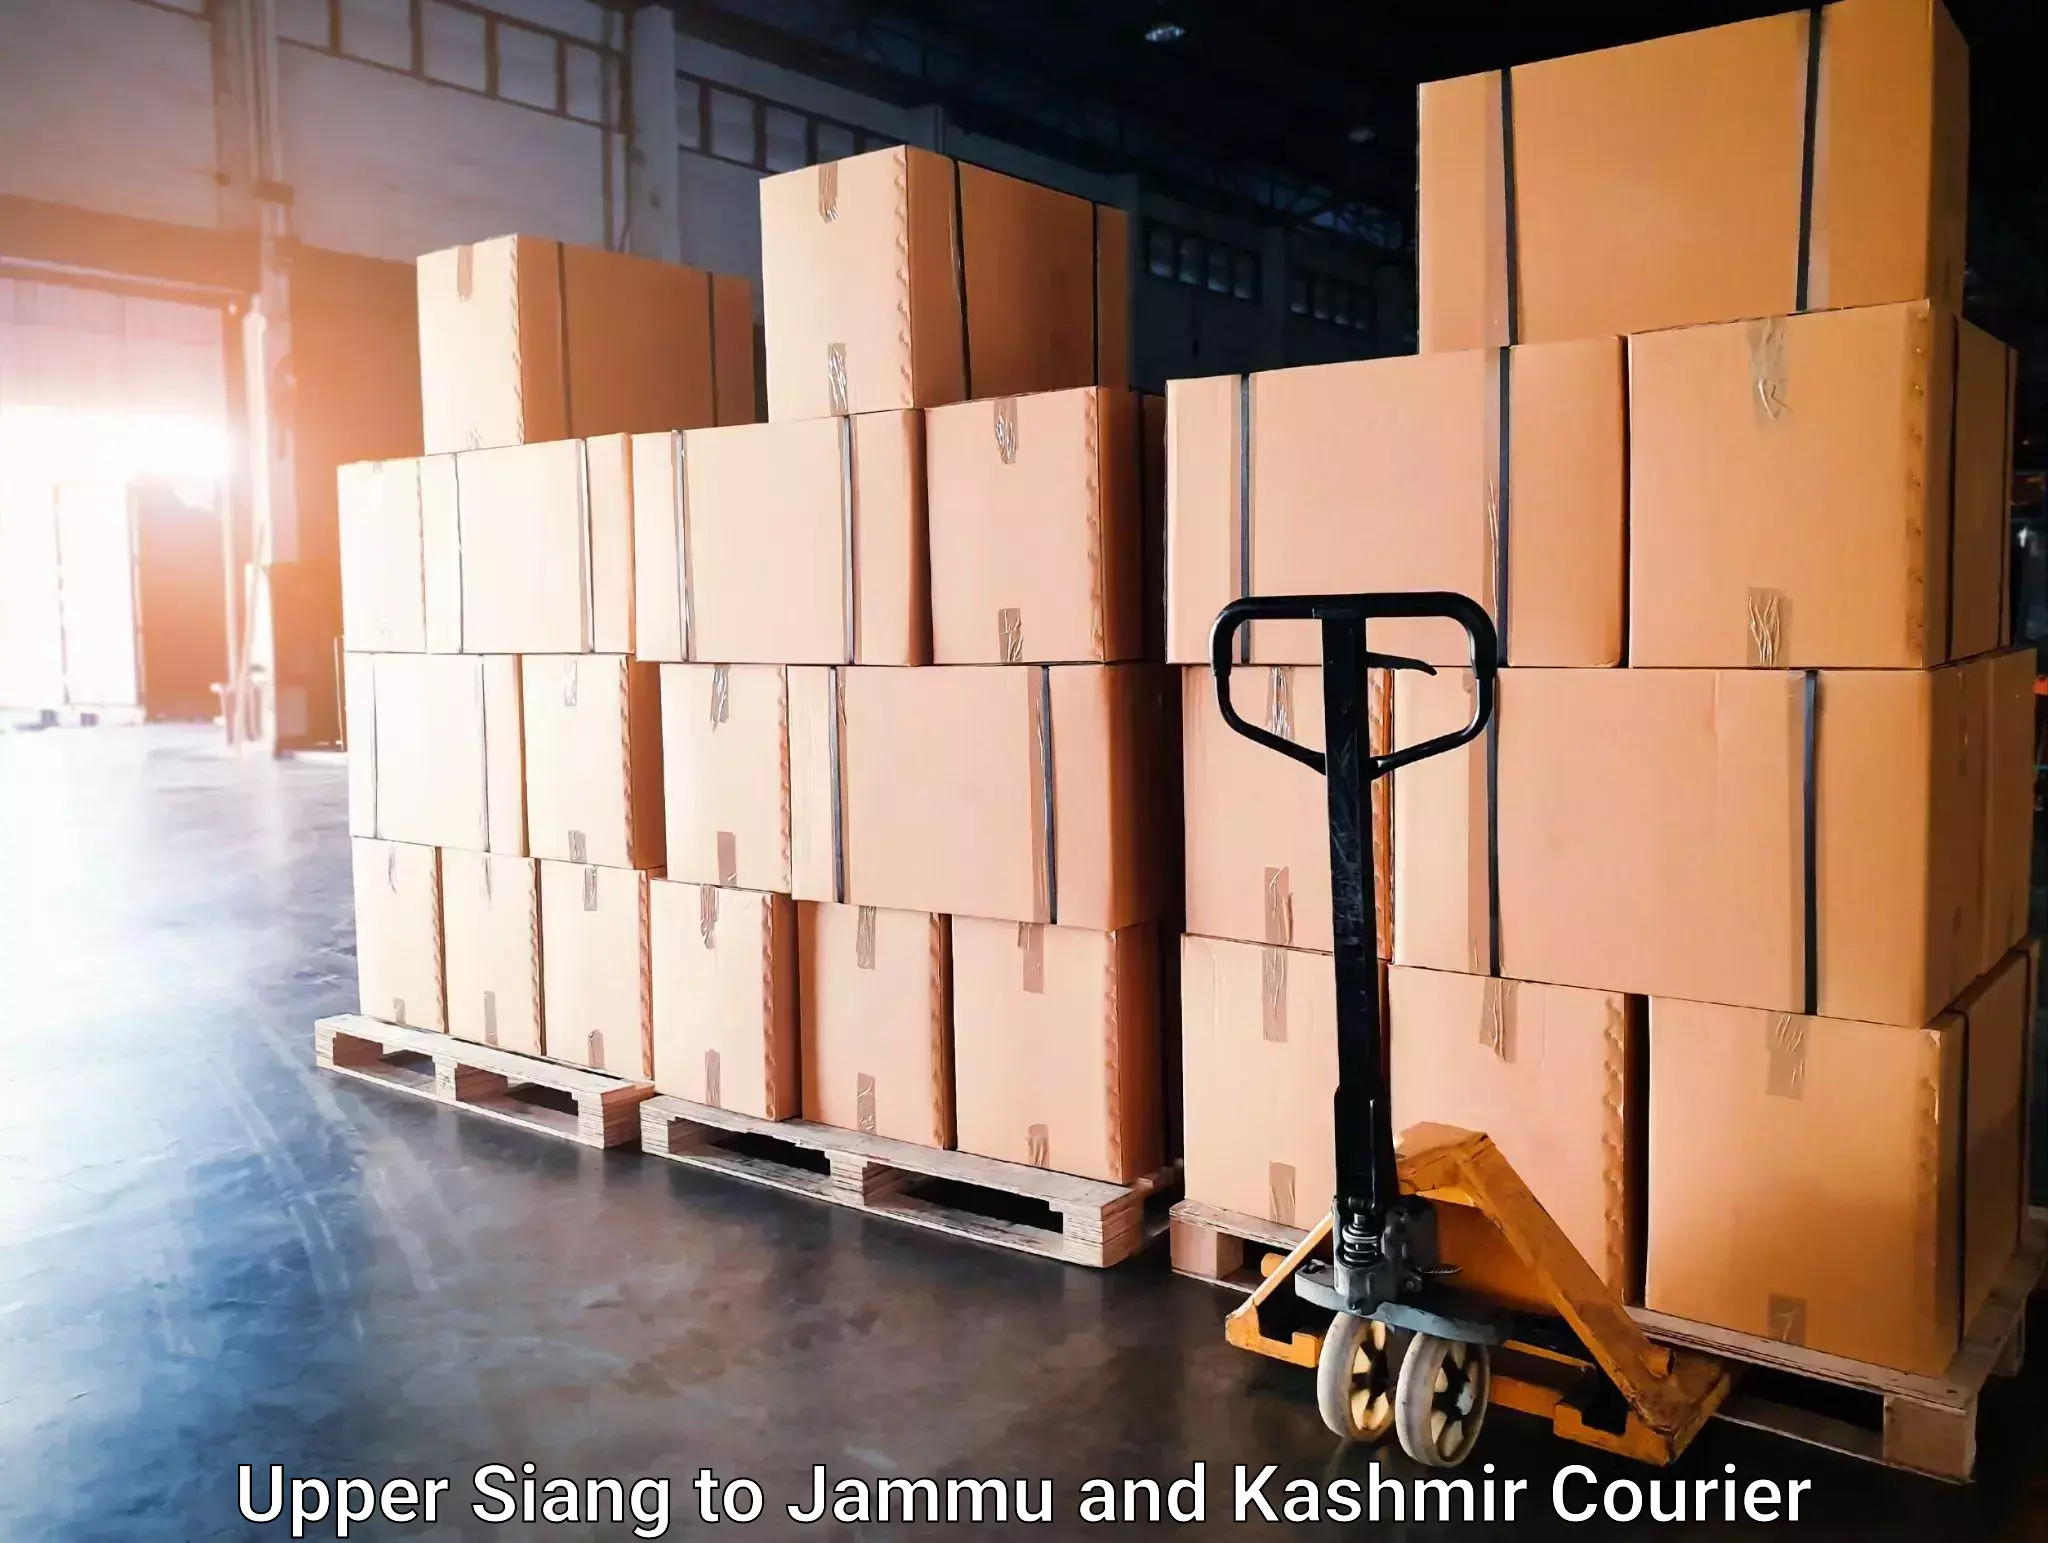 Courier service innovation Upper Siang to Shopian